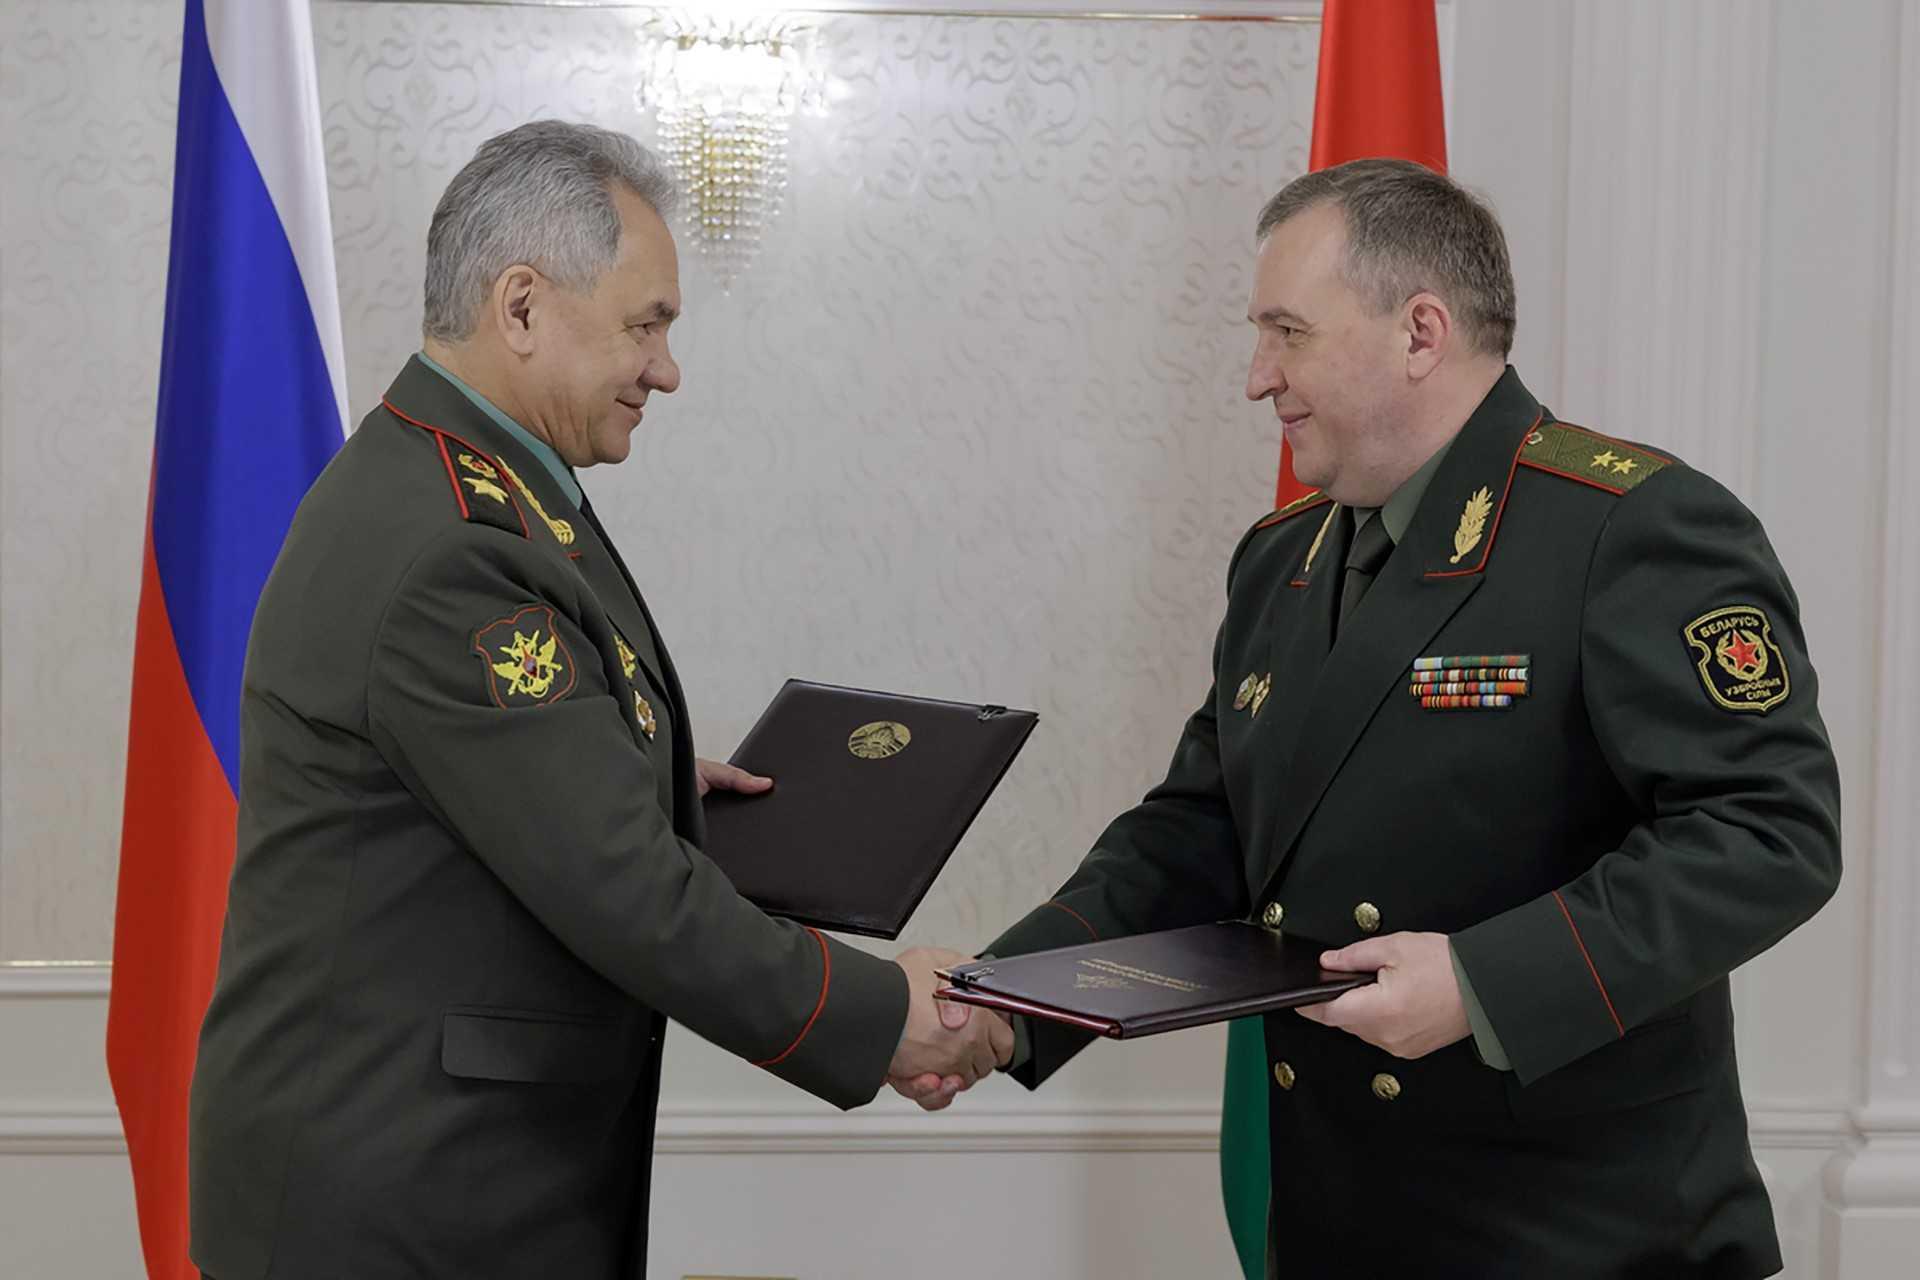 Russian Defence Minister Sergei Shoigu and his Belarusian counterpart Viktor Khrenin shake hands after signing an agreement on the deployment of Russia's nuclear-capable weapons in Belarus, in Minsk on May 25. Photo: AFP